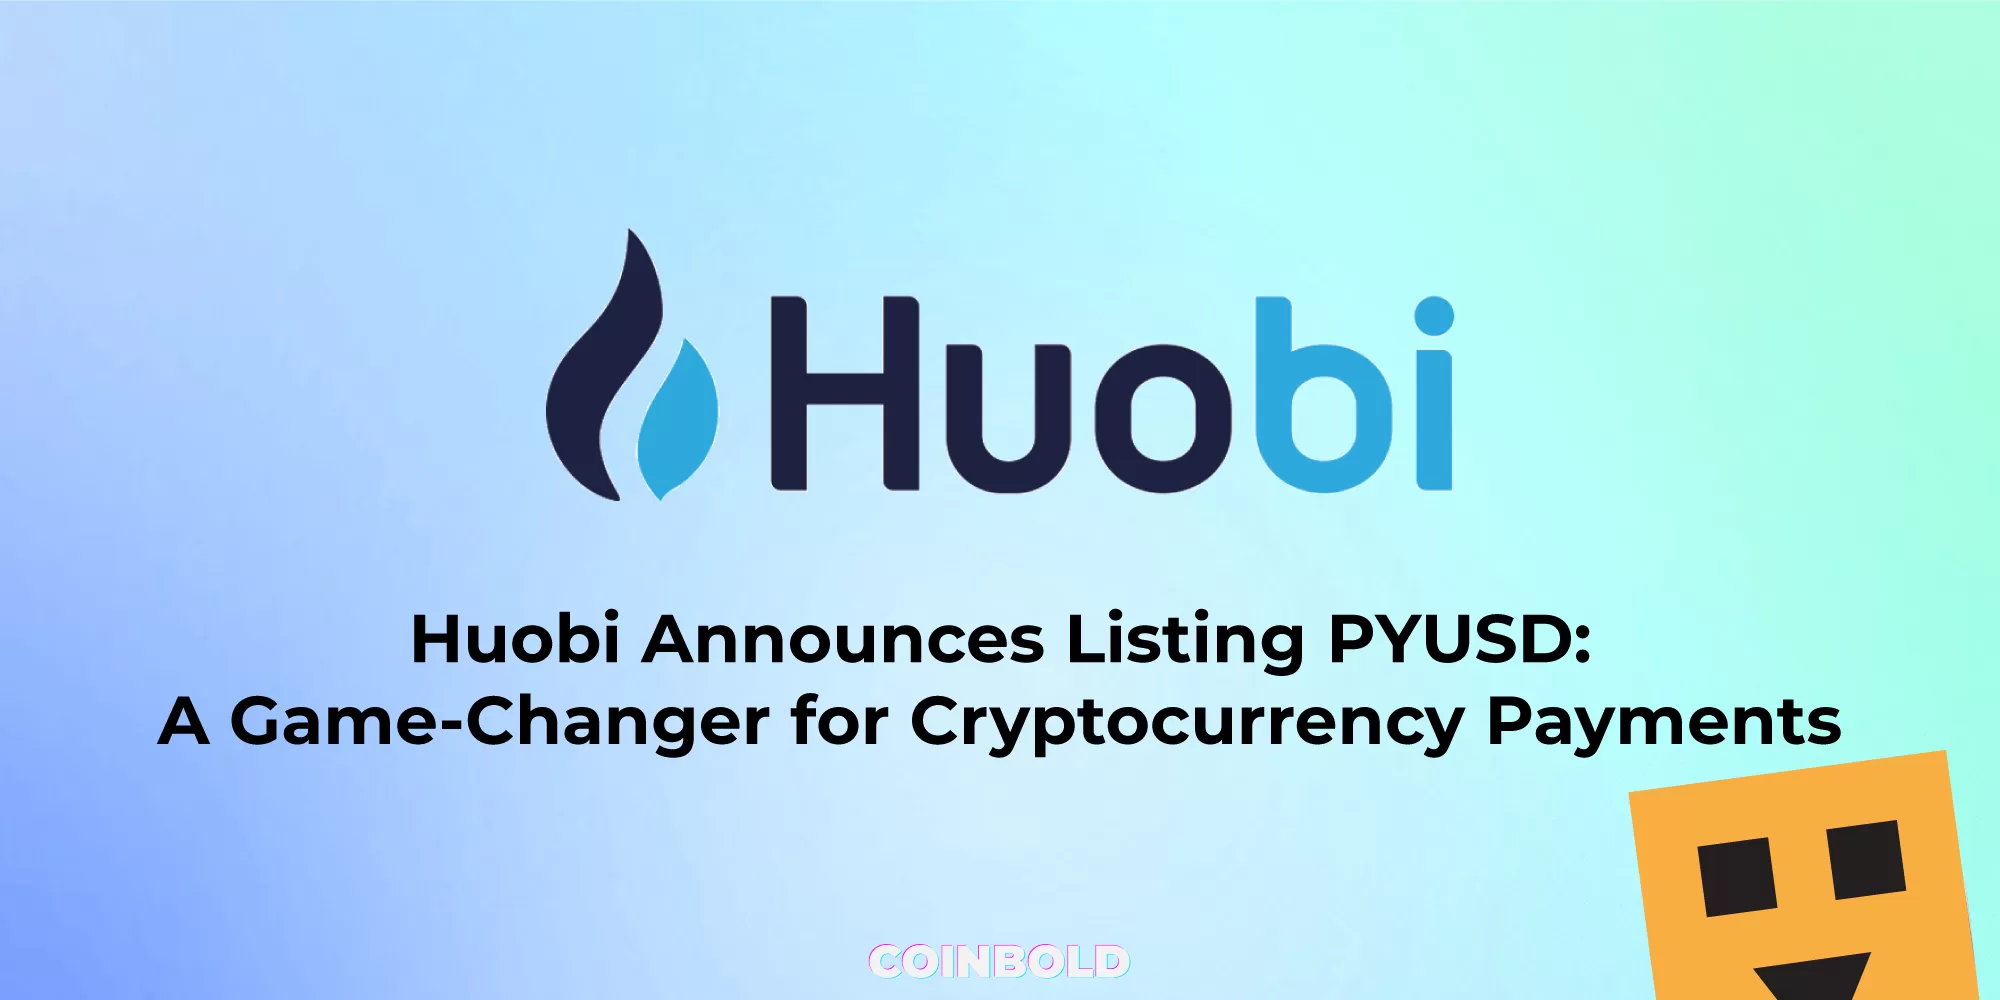 Huobi Announces Listing PYUSD A Game Changer for Cryptocurrency Payments